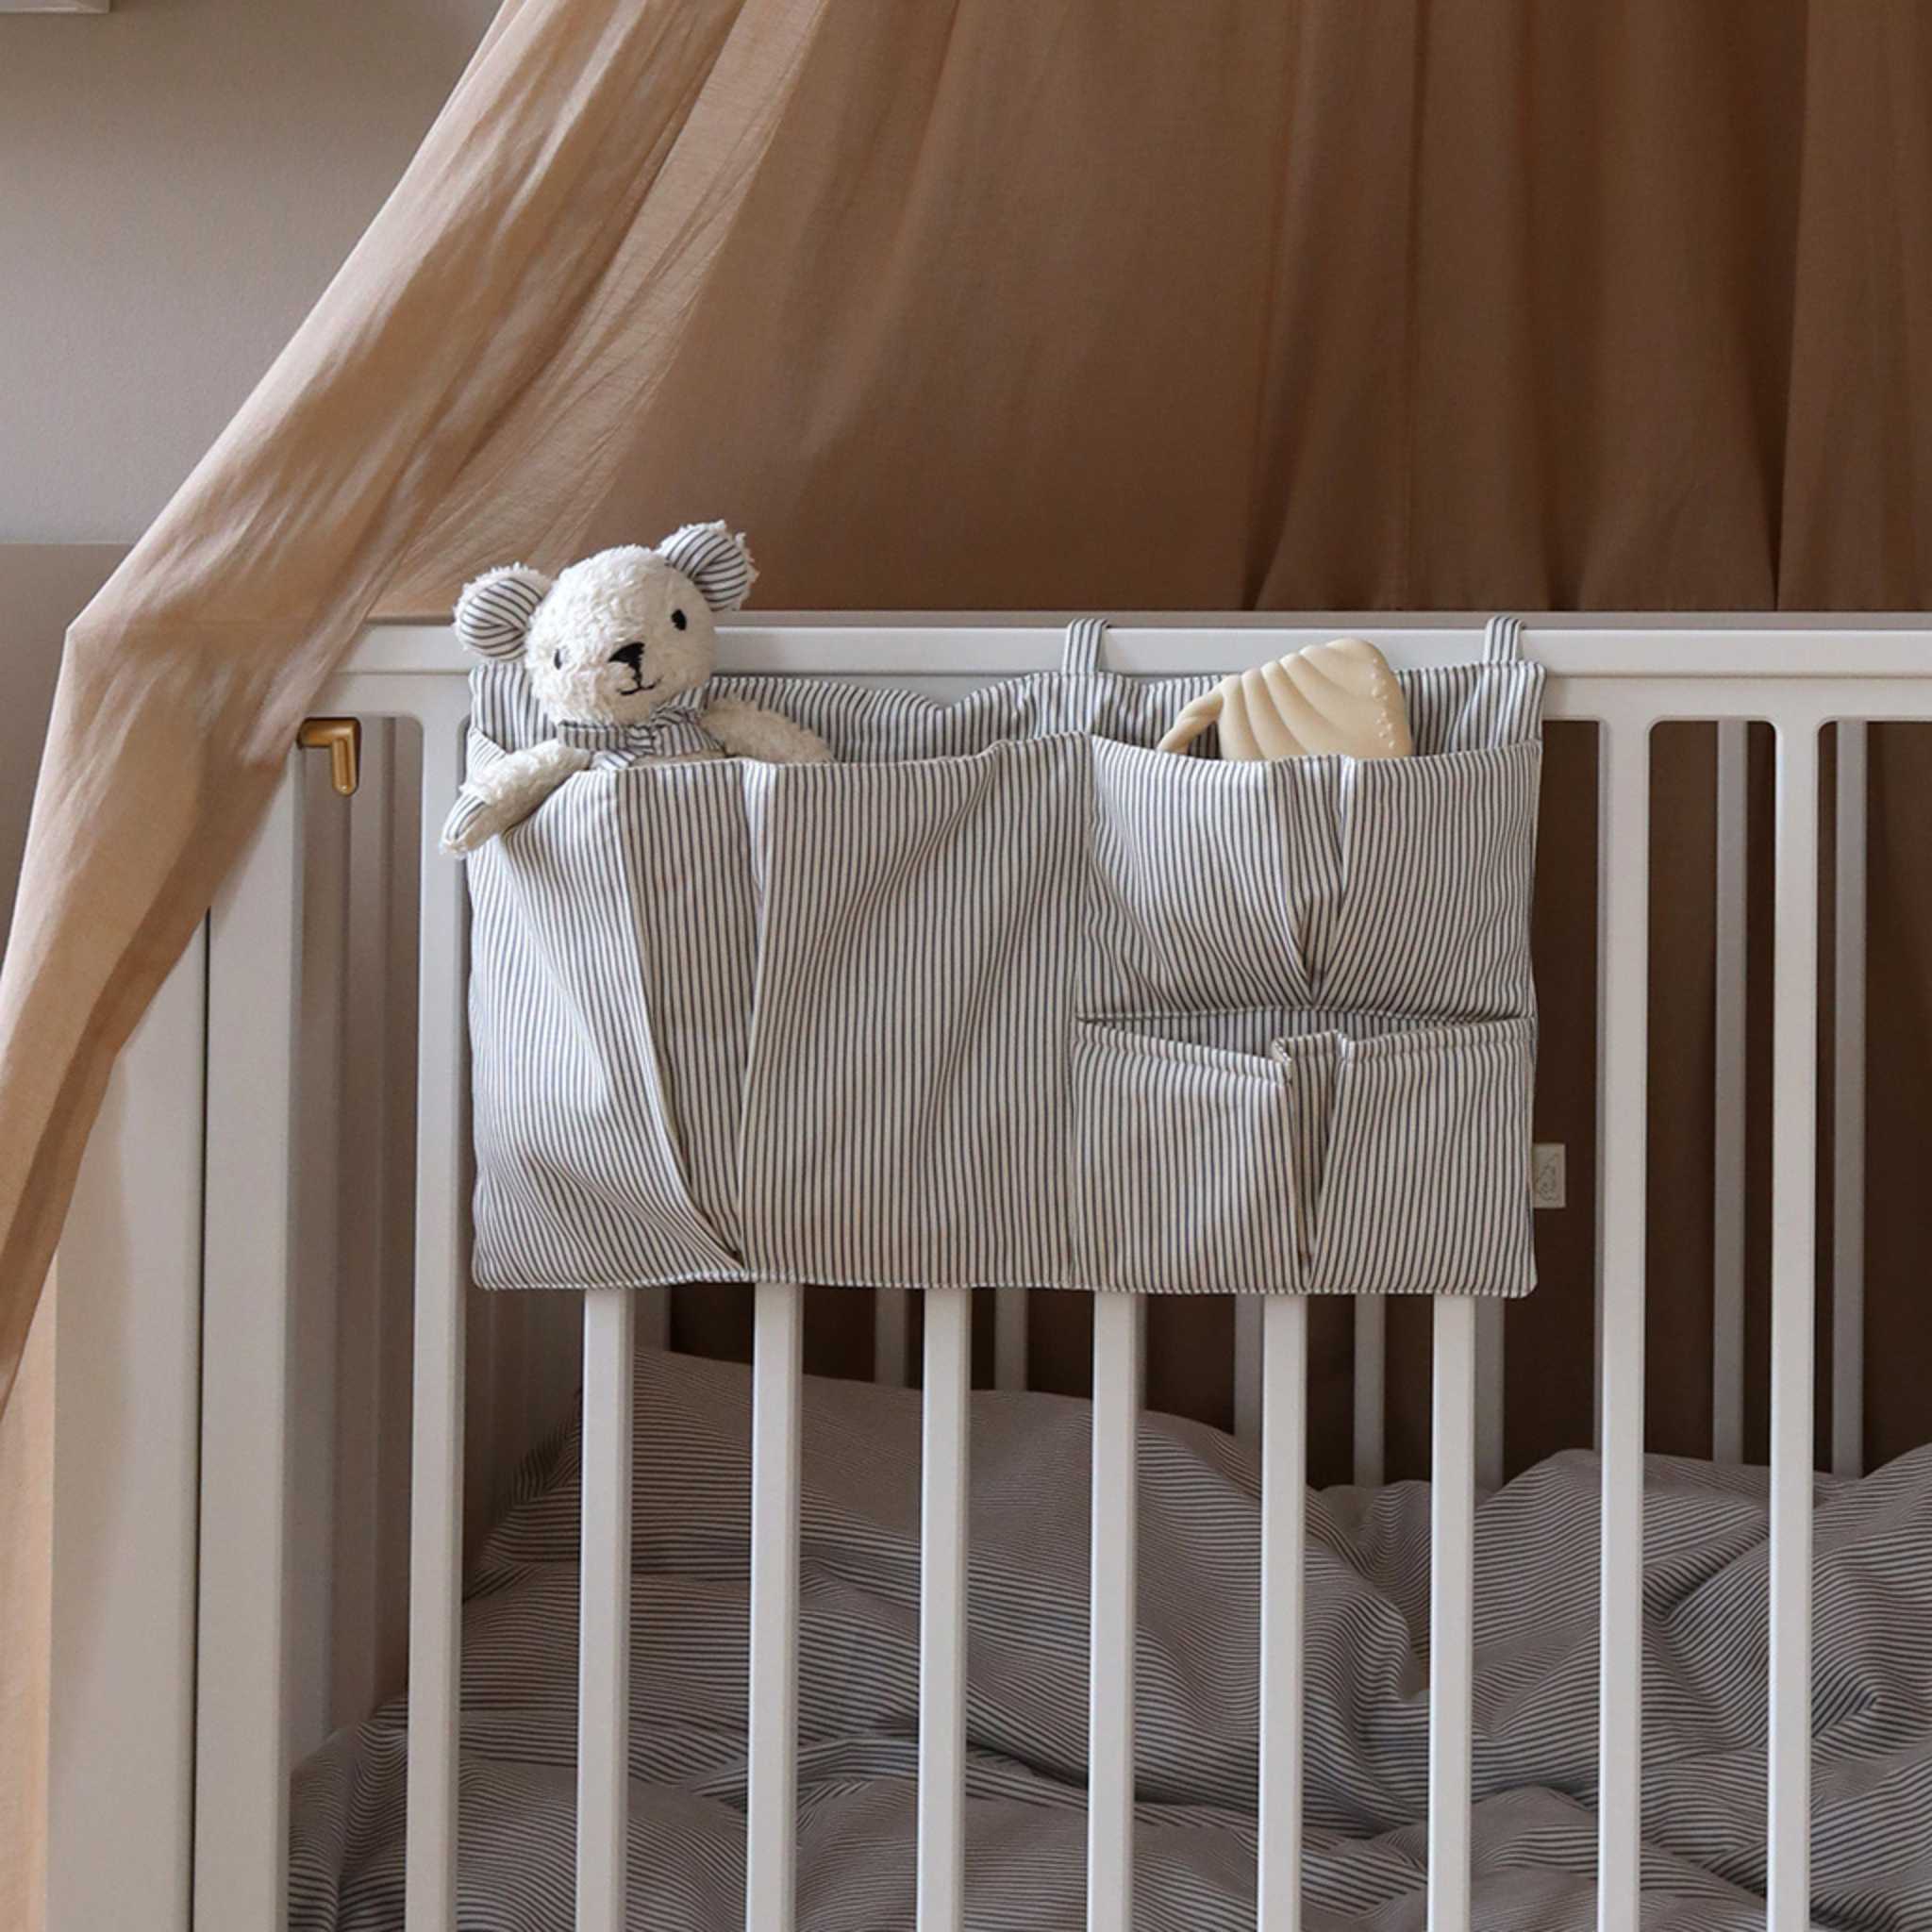 Cam Cam Copenhagen Bed Pocket in Classic Blue Stripes Filled With Teddy and Teether